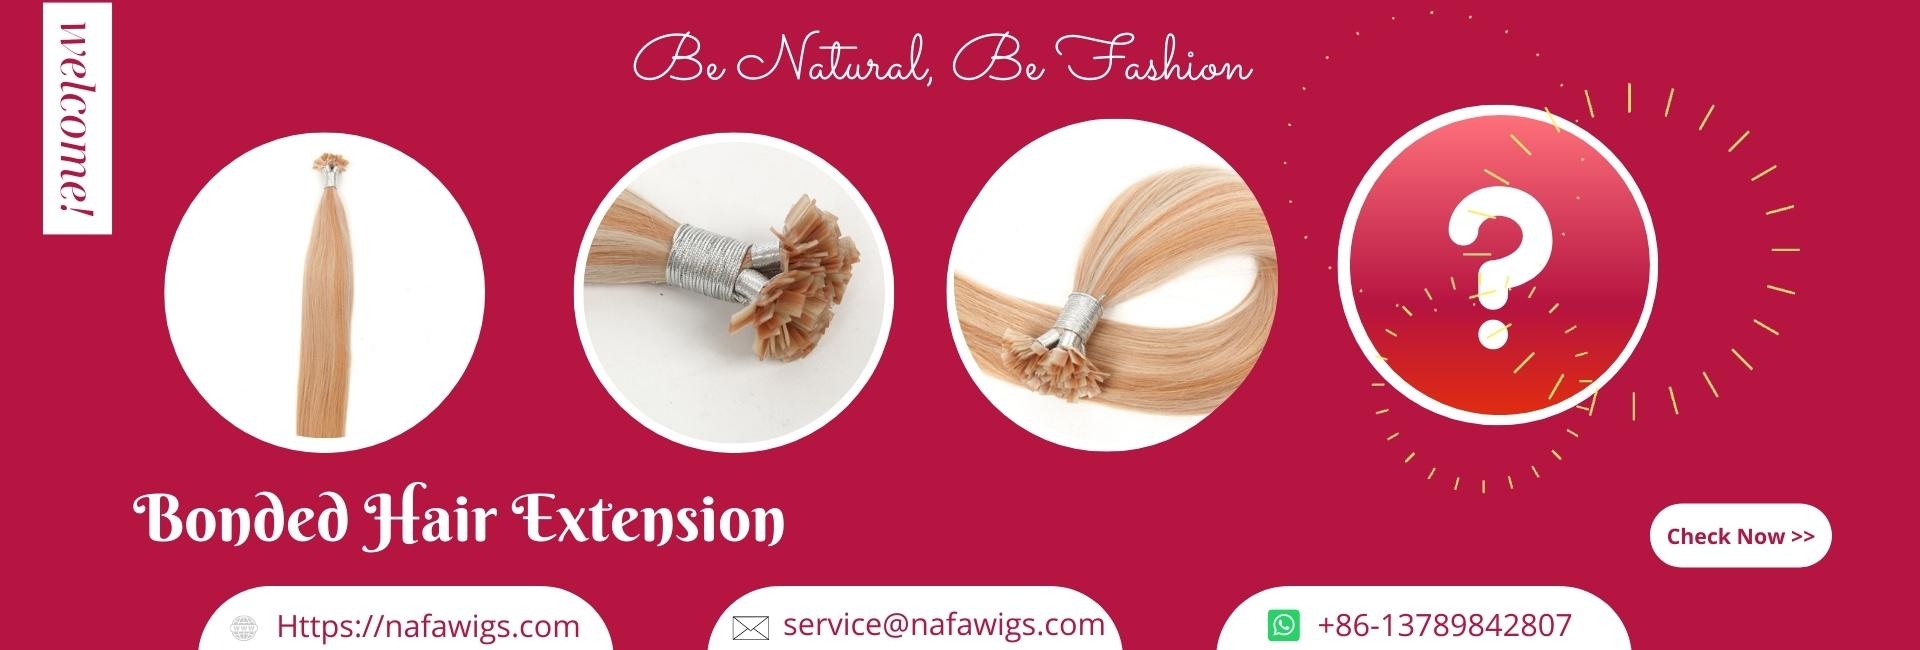 Bonded Hair Extensions